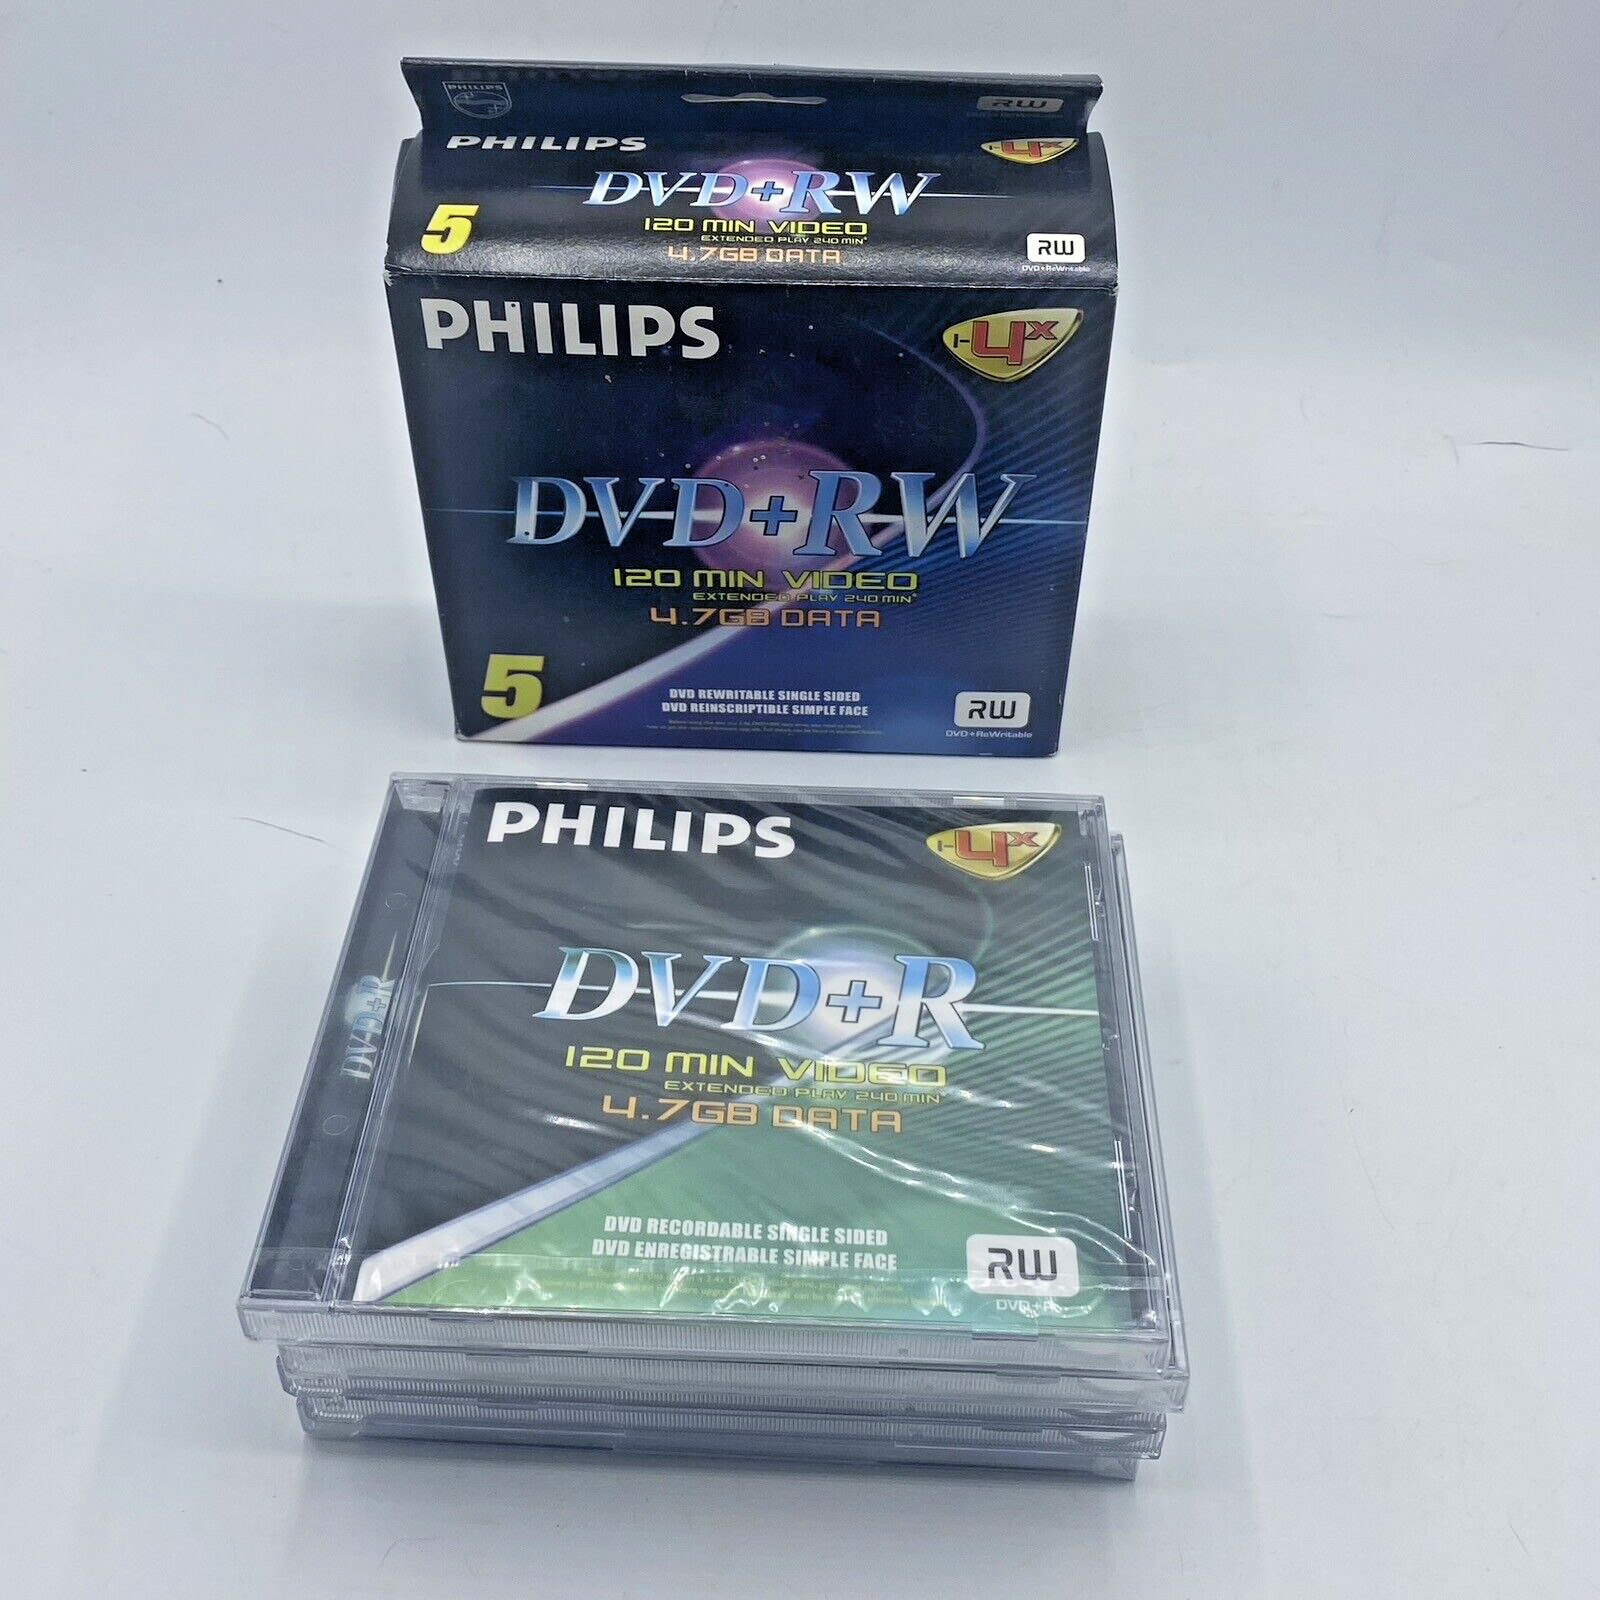 Philips DVD+RW 4x 120 Min 4.7 GB Data Blank Disc In Sealed Case + 3 Loose Sealed